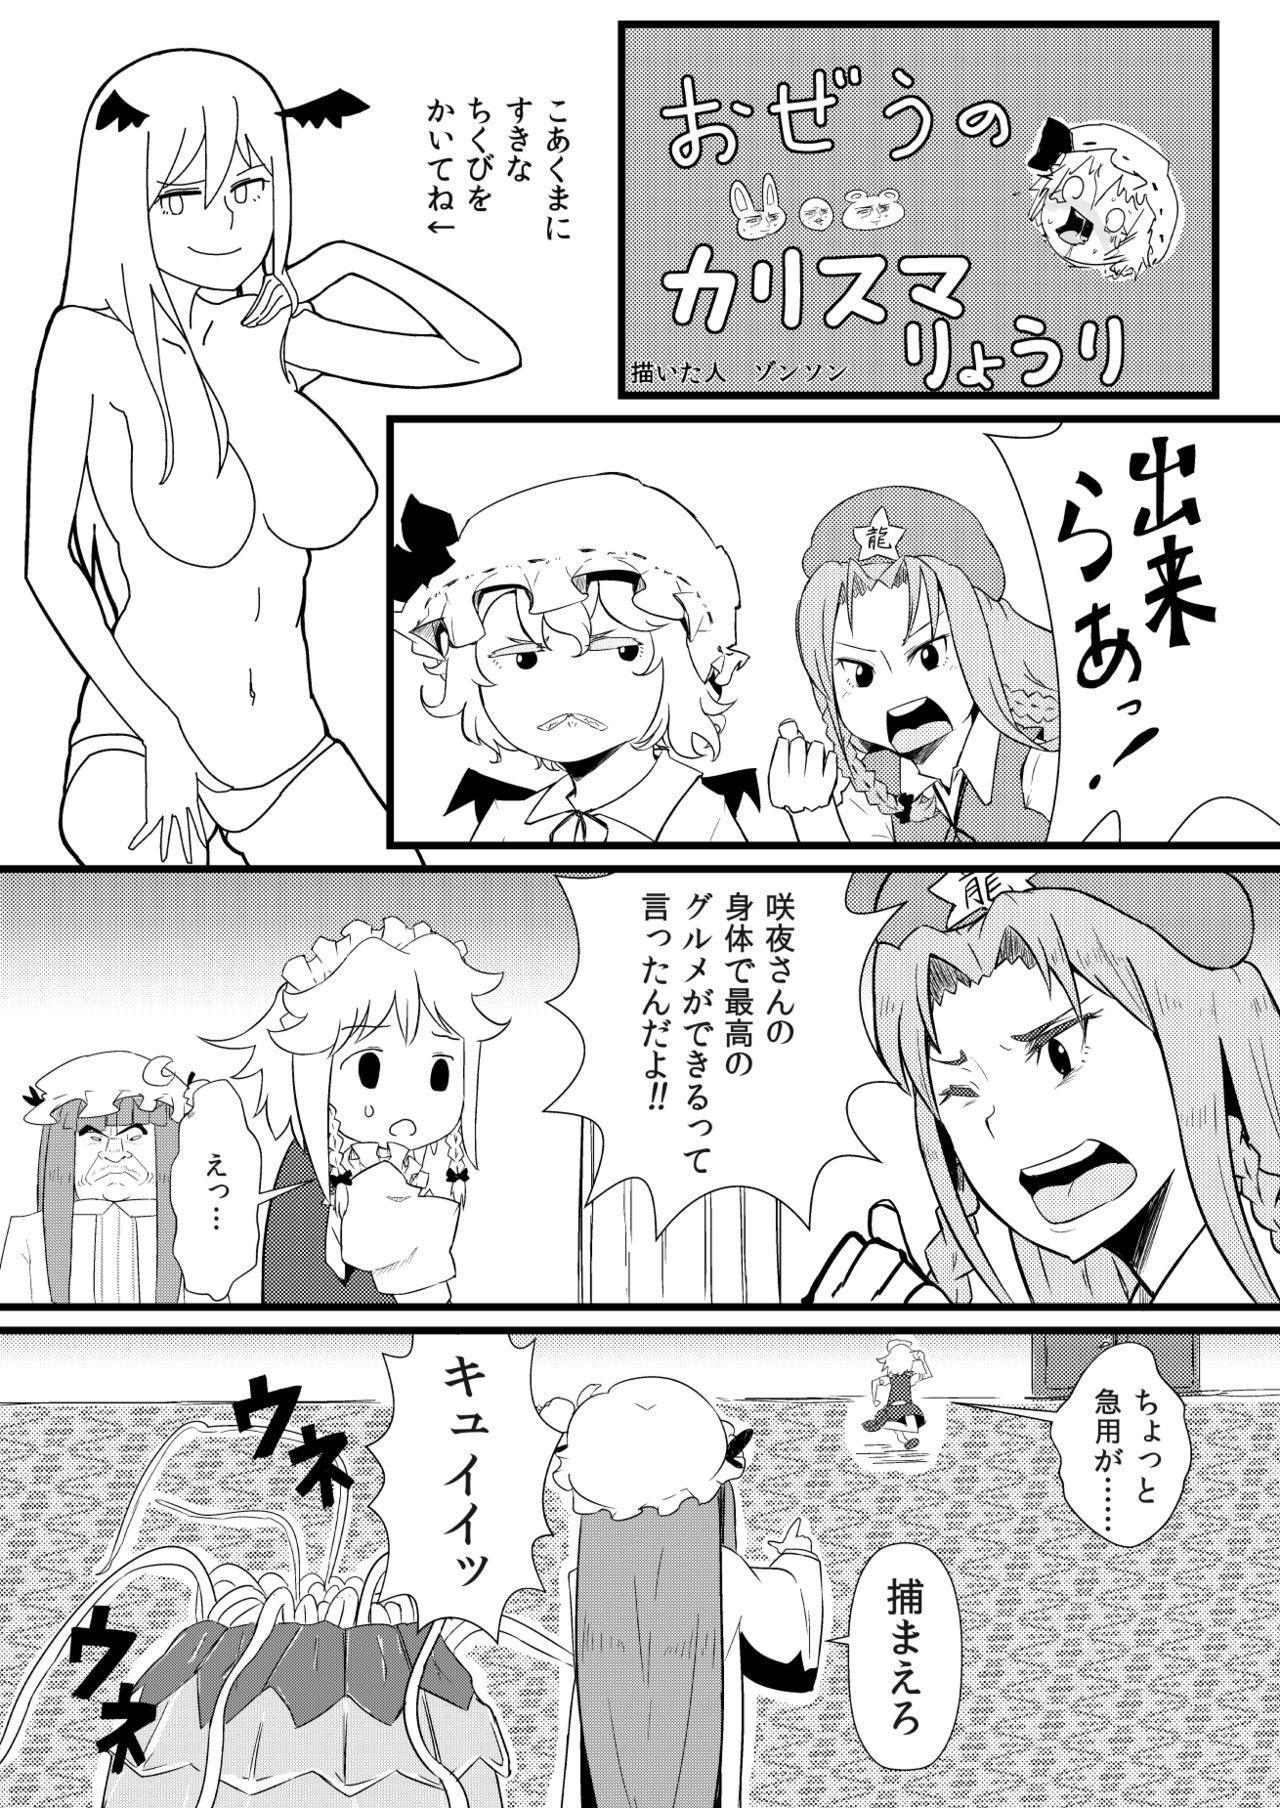 Double Penetration 東方板としあき合同誌5 - Touhou project Dirty Talk - Page 5